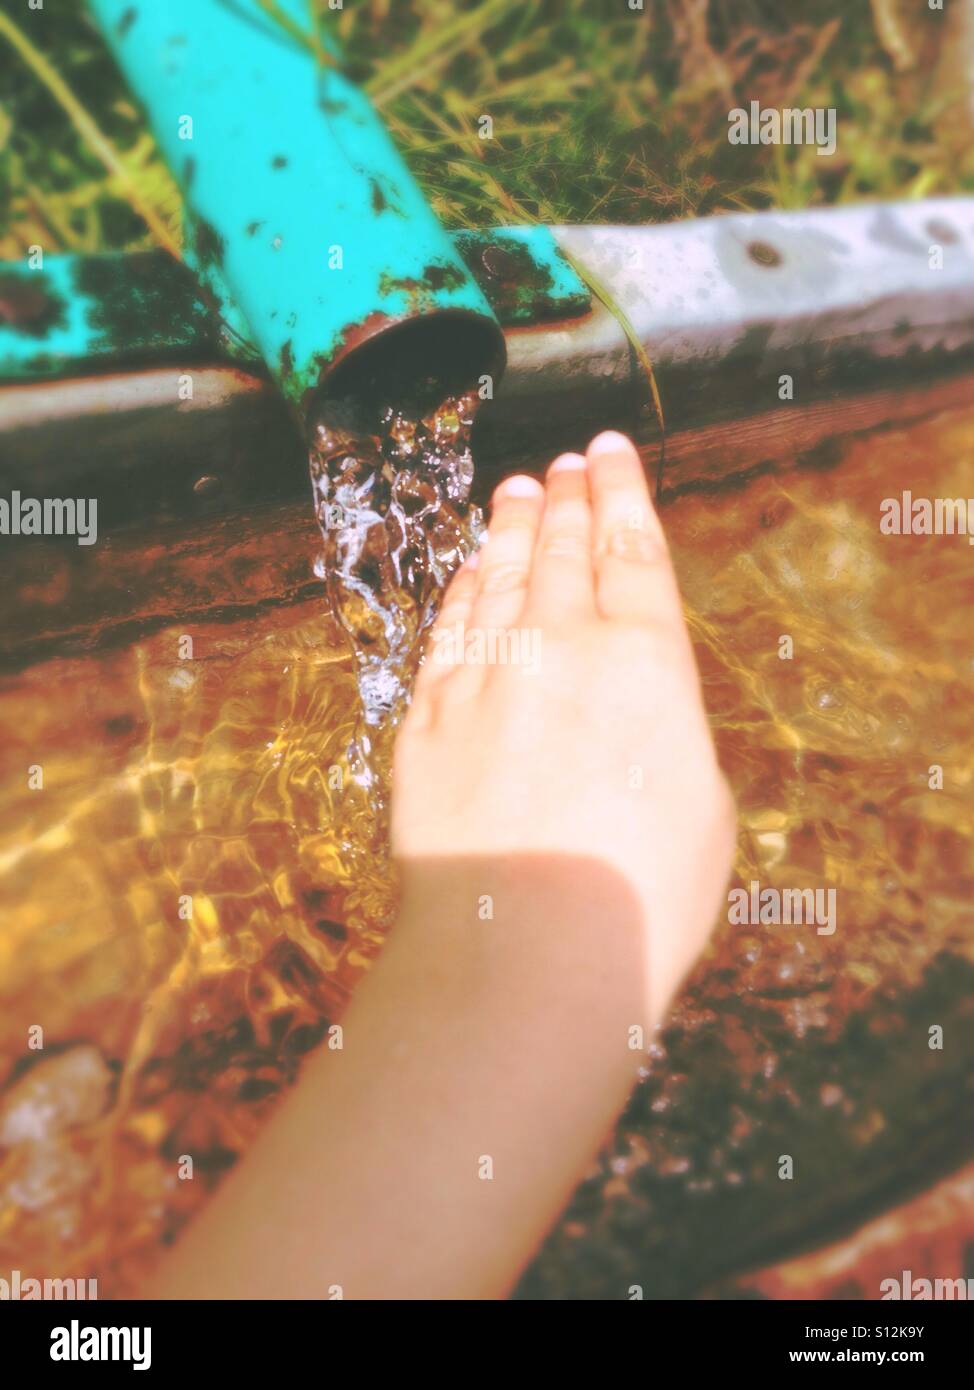 The hand of a caucasian boy reaching for fresh water flowing from a green pipe into a bassin Stock Photo